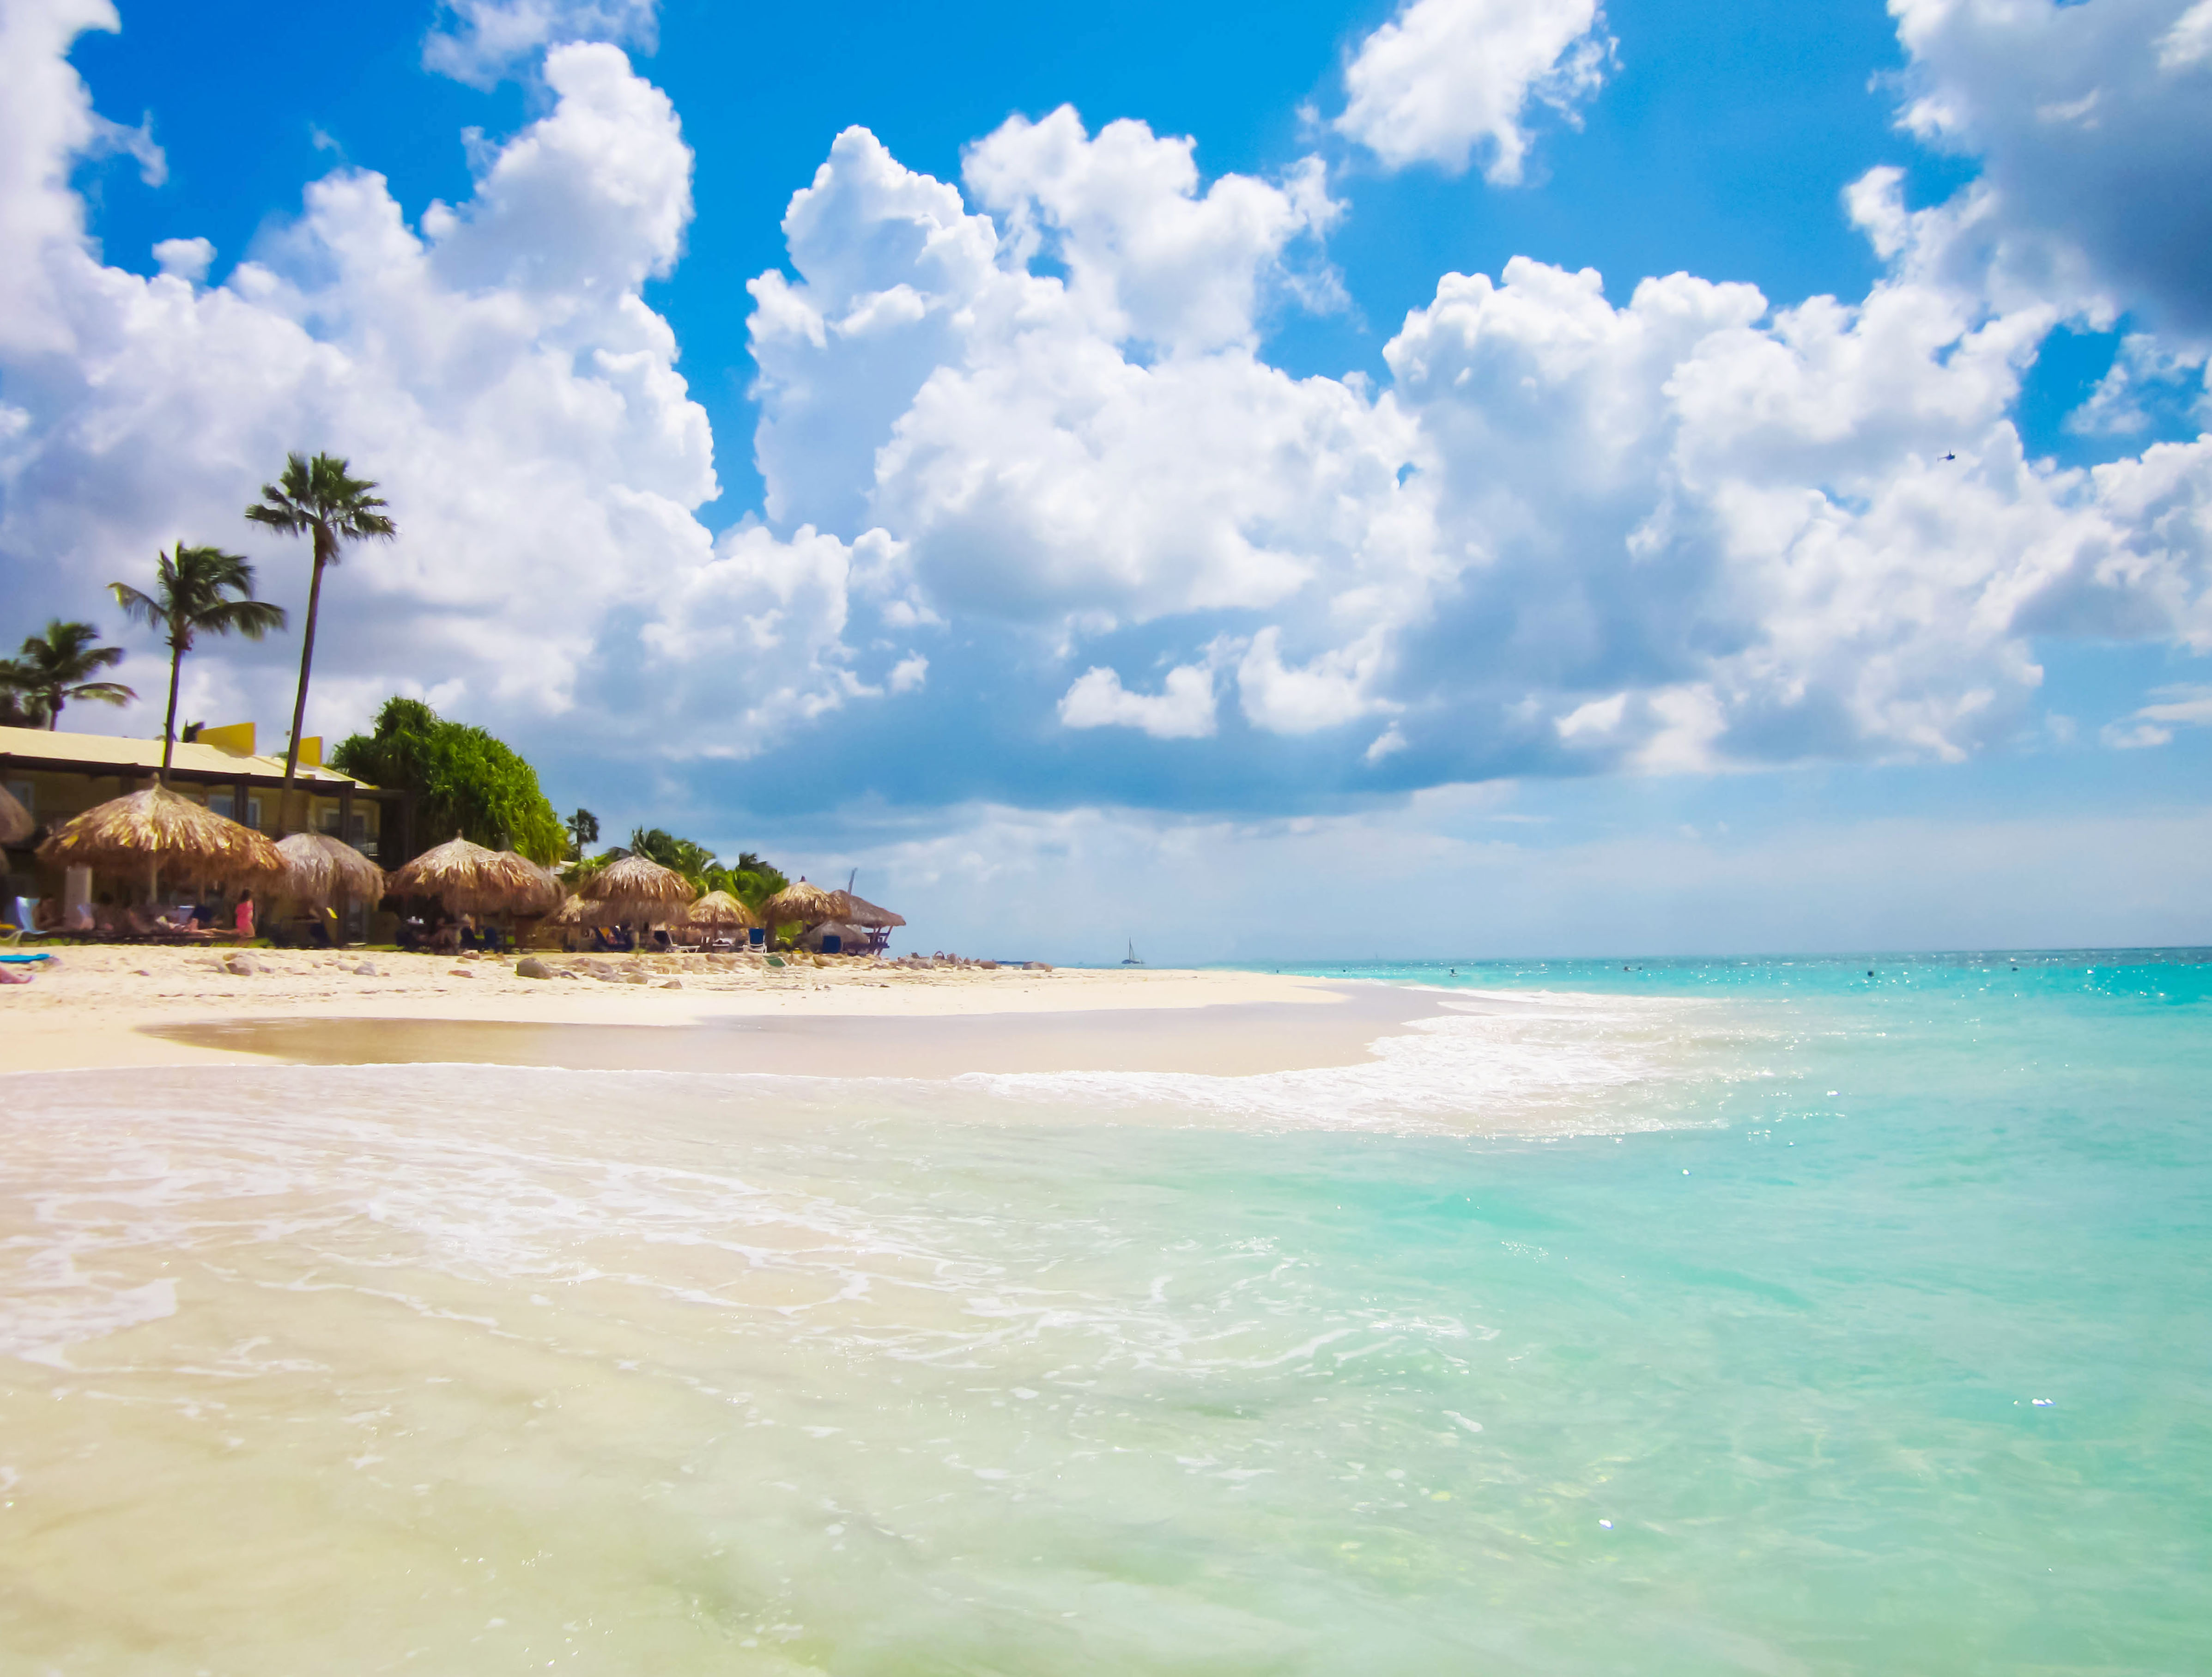 Cruising the Caribbean? Check Out These Best Islands - Aruba